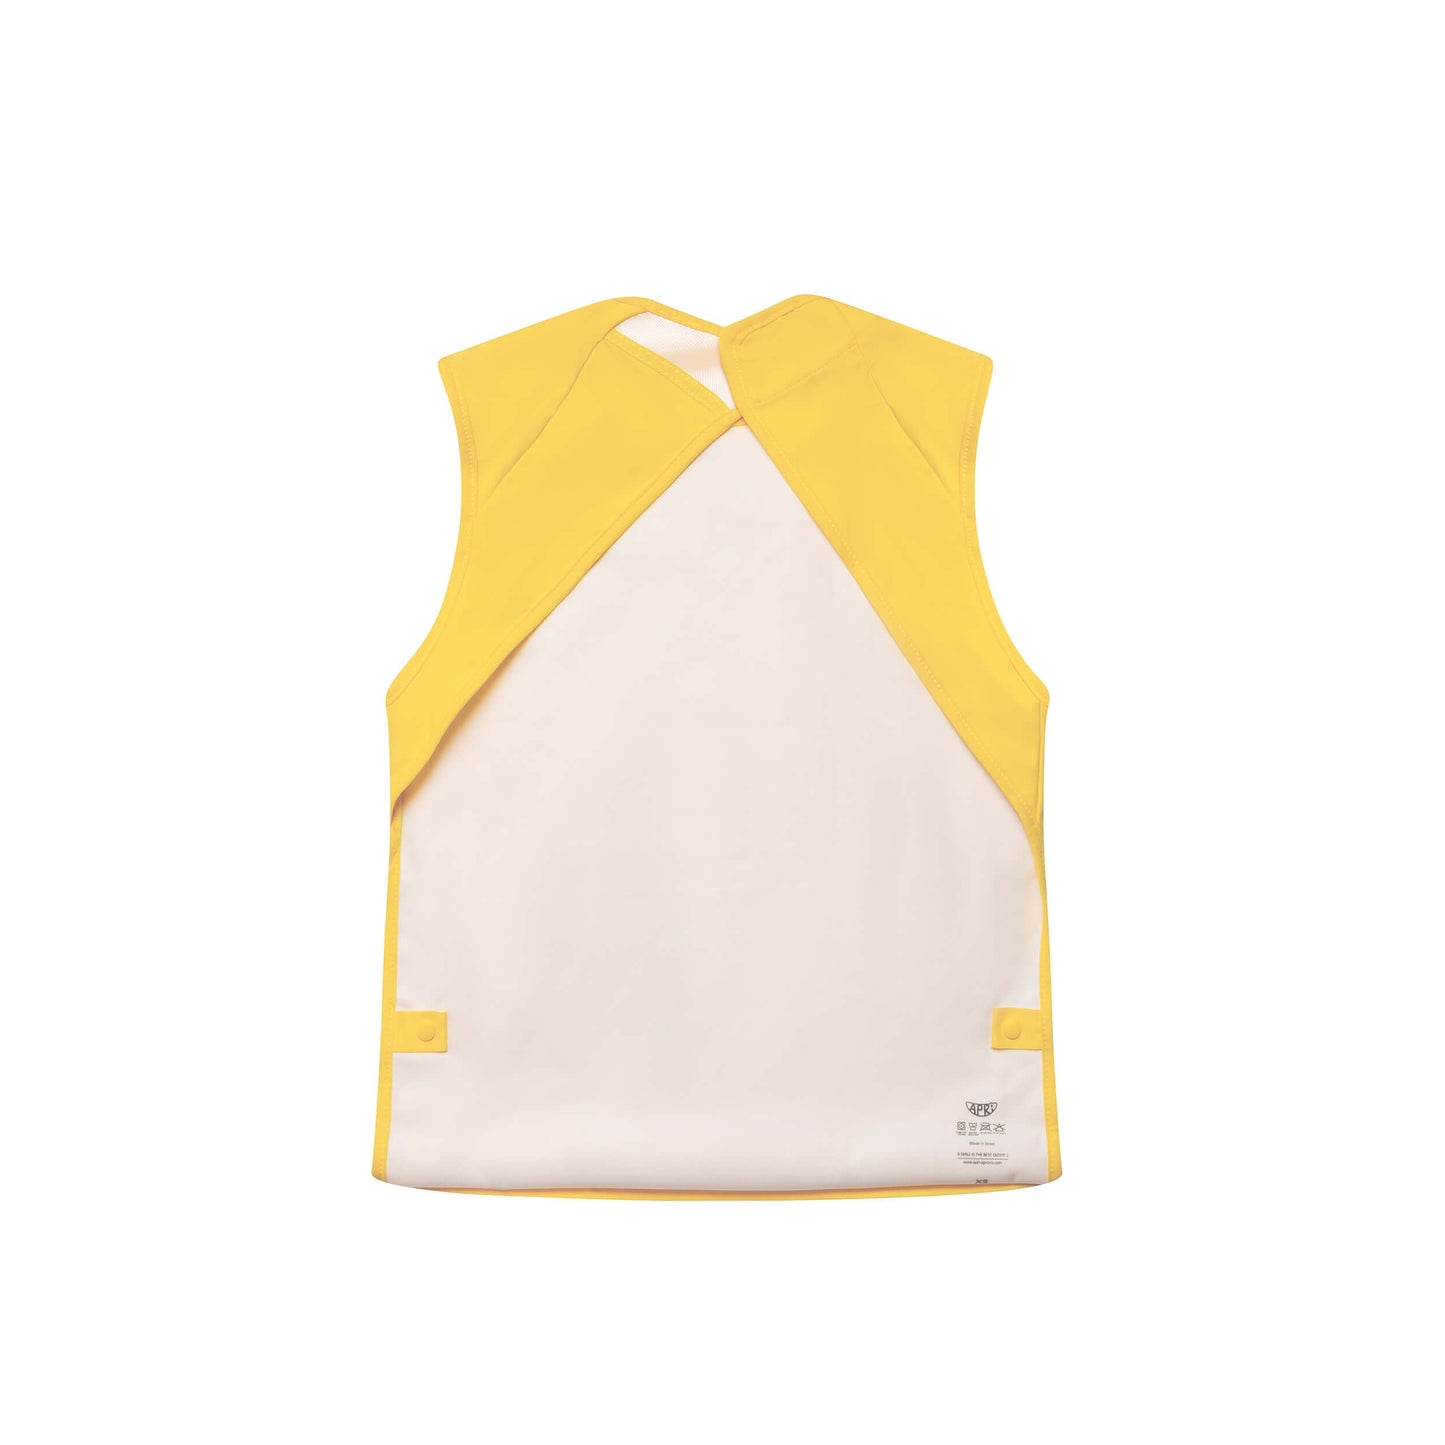 Apri Bibs: Waterproof bib for kids, teens, and adults with disabilities. Sunshine yellow cap-sleeves, washable silicone fastener.